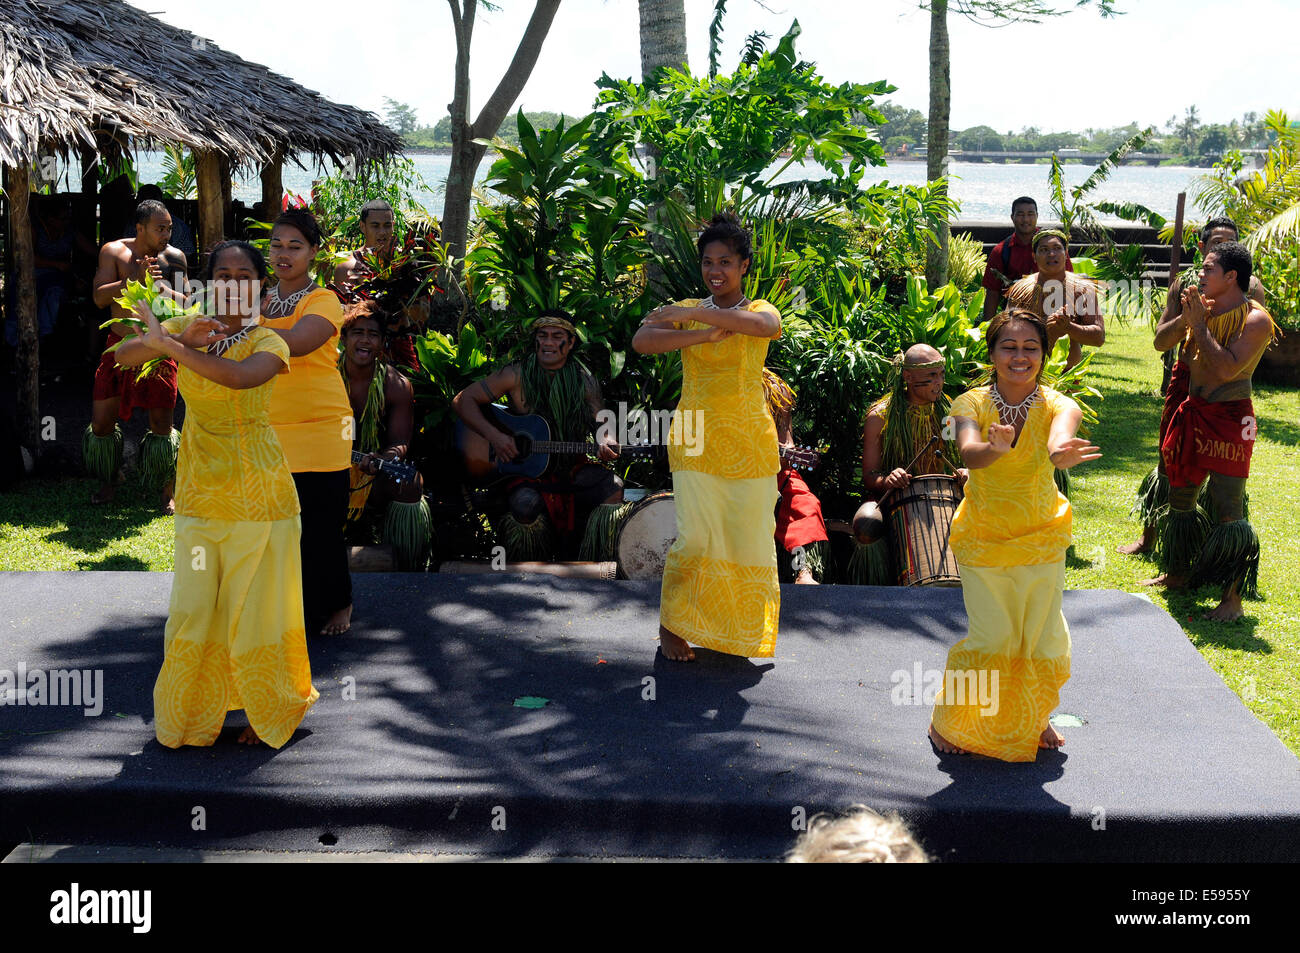 Travelling through Samoa in February 2014. Traditional dancer - tourism Stock Photo